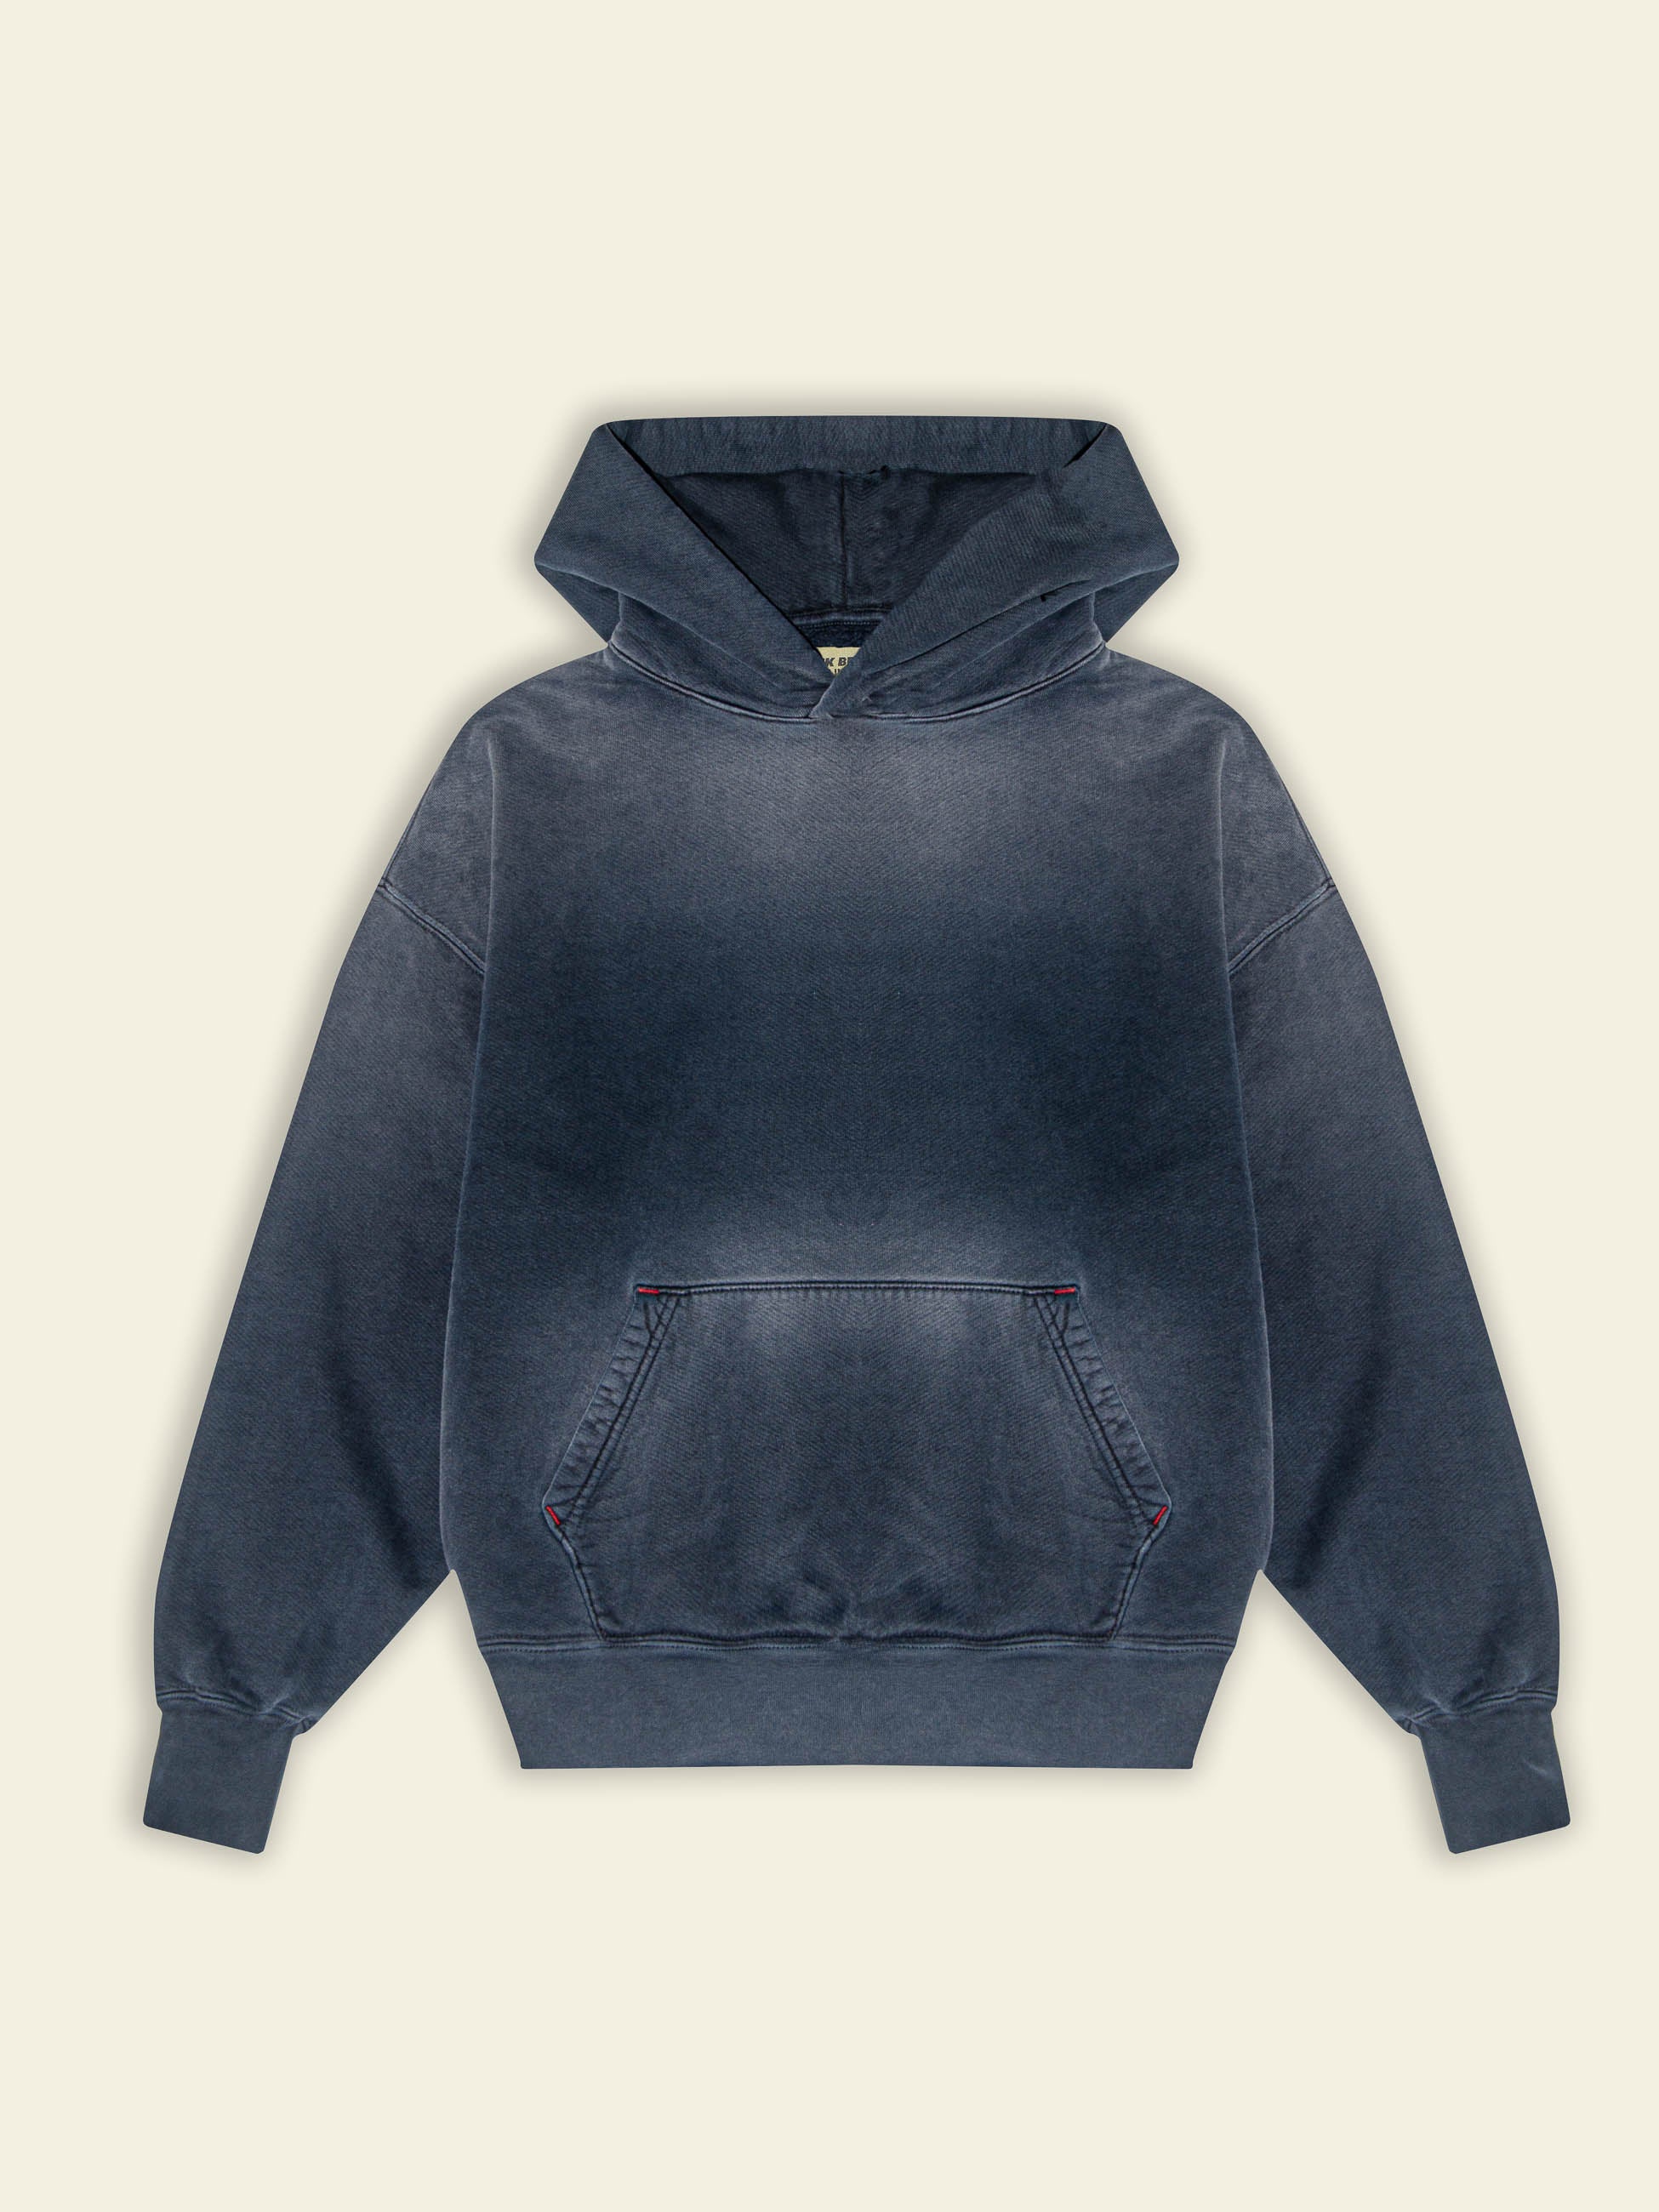 Publik Brand Double Layered Fleece Navy Hoodie Flat Made in USA